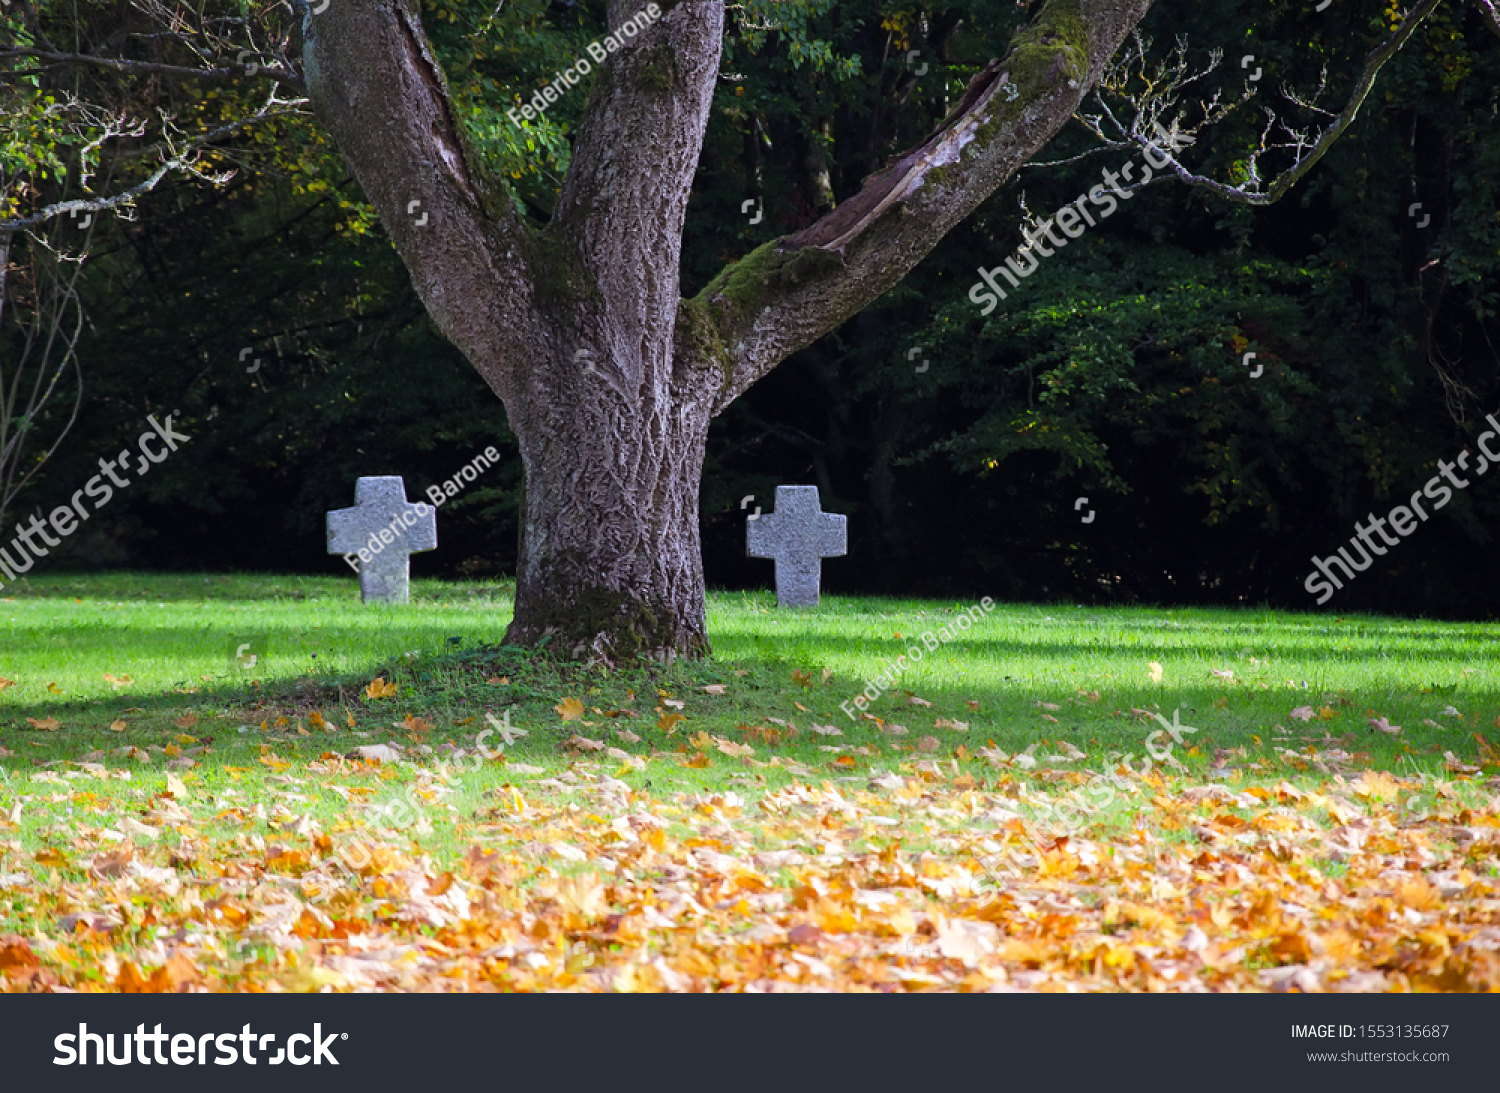 stock-photo-view-of-a-tree-in-a-bed-of-y